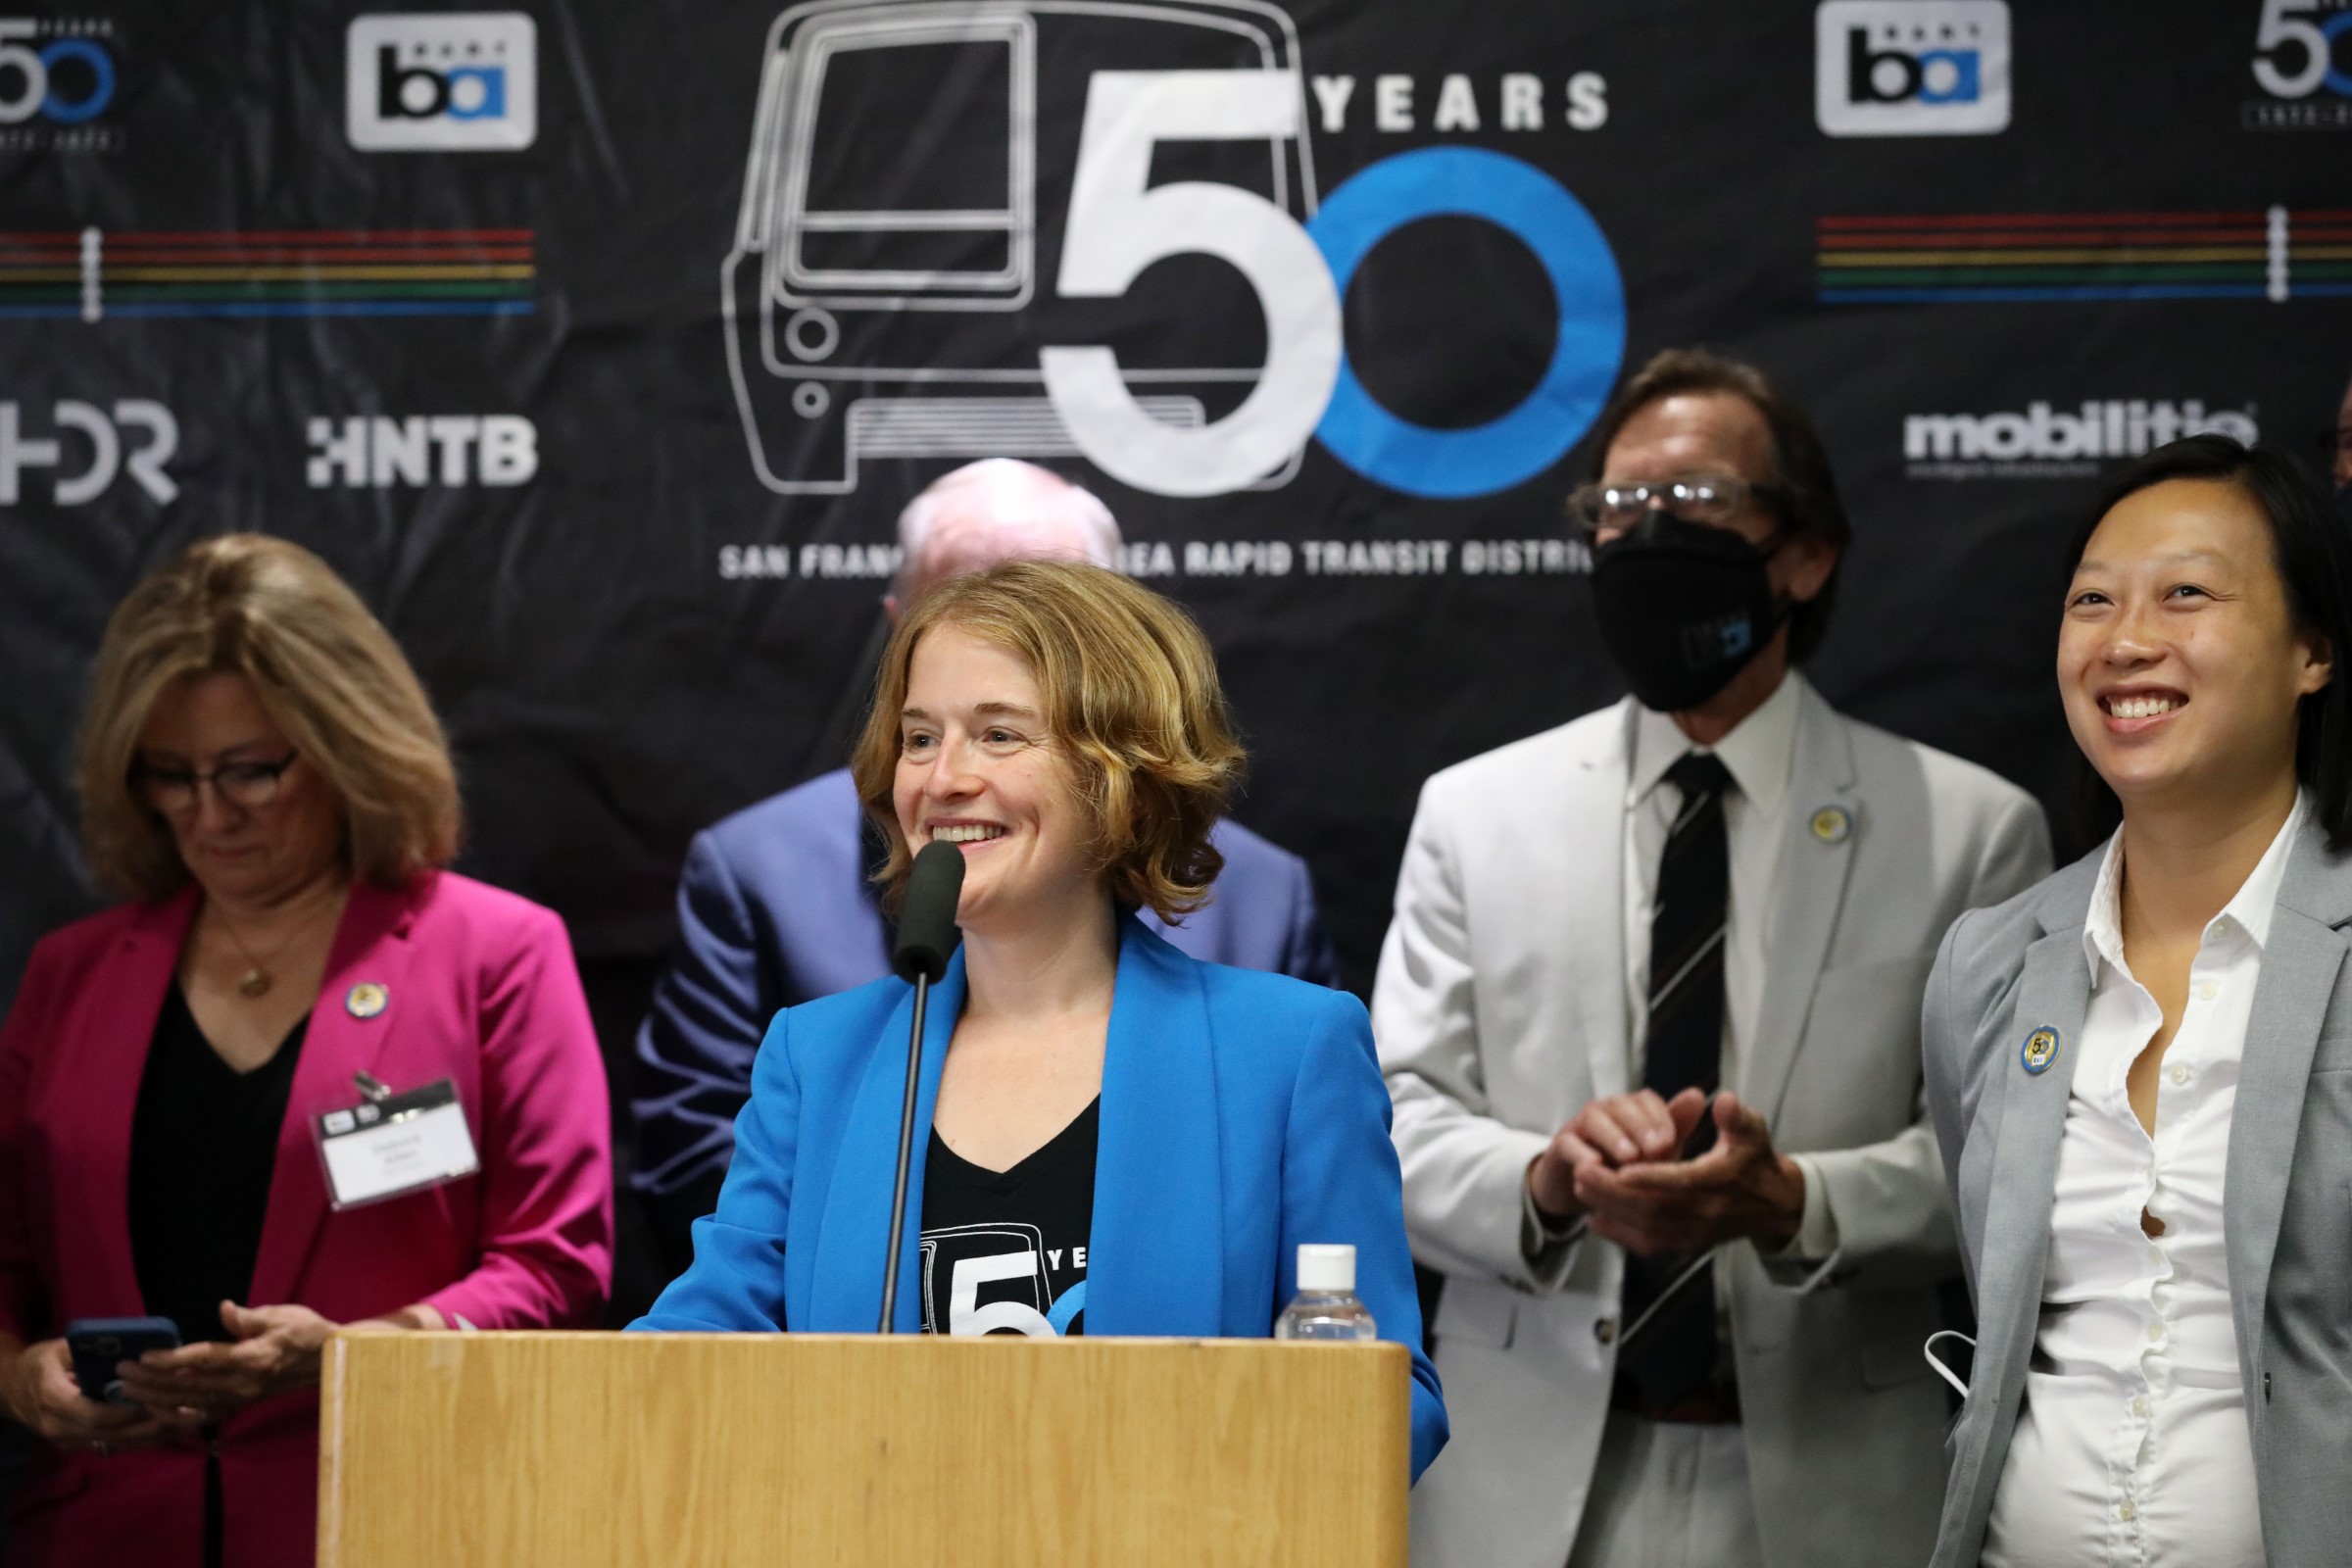 BART Director Rebecca Saltzman speaks at the 50th Anniversary Celebration and Family Fun Festival on Sept. 10, 2022.